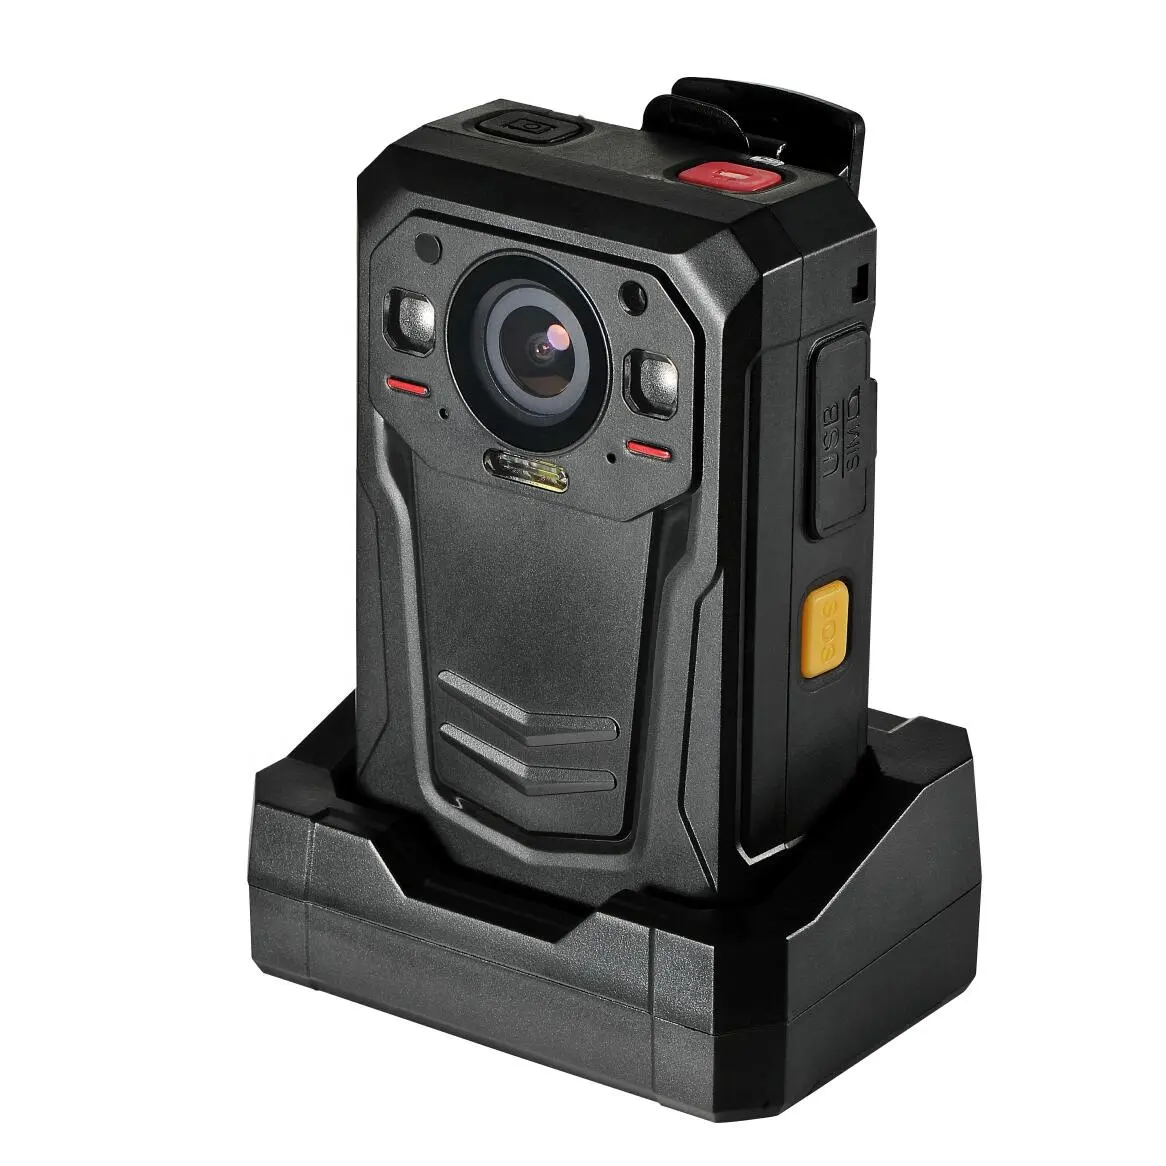 High Quality 1080P Real-time Video Recording Night Vision IP68 Waterproof Laws Enforce Equipement Body Worn Camera with 64GB